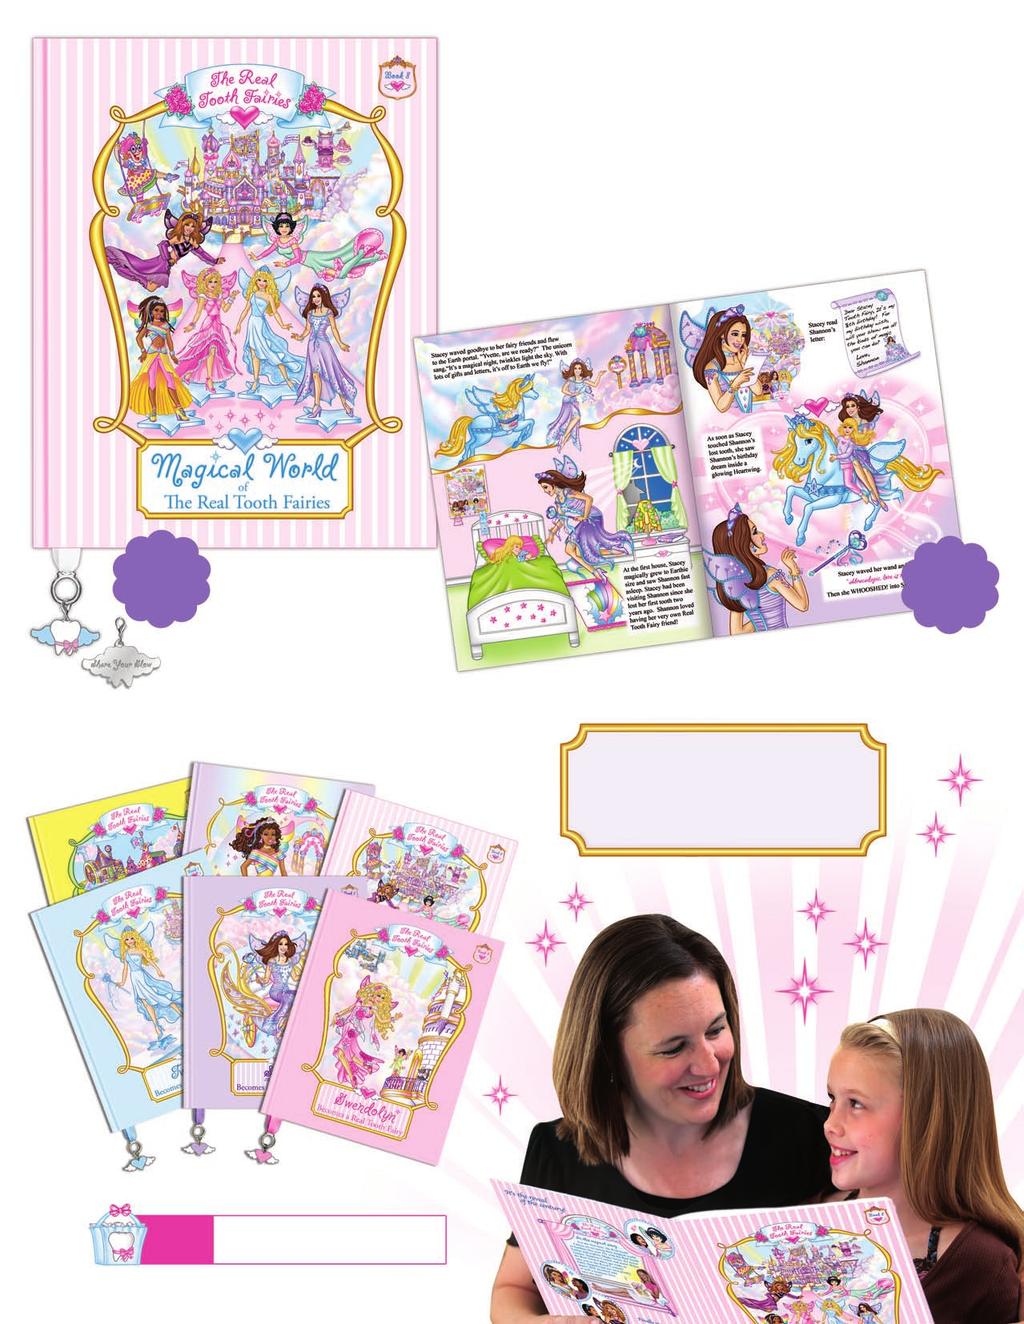 Award-Winning Book Series Positive Values & Fairy Magic The Real Tooth Fairy Book Series reveals everything tooth fairy that girls want to know!